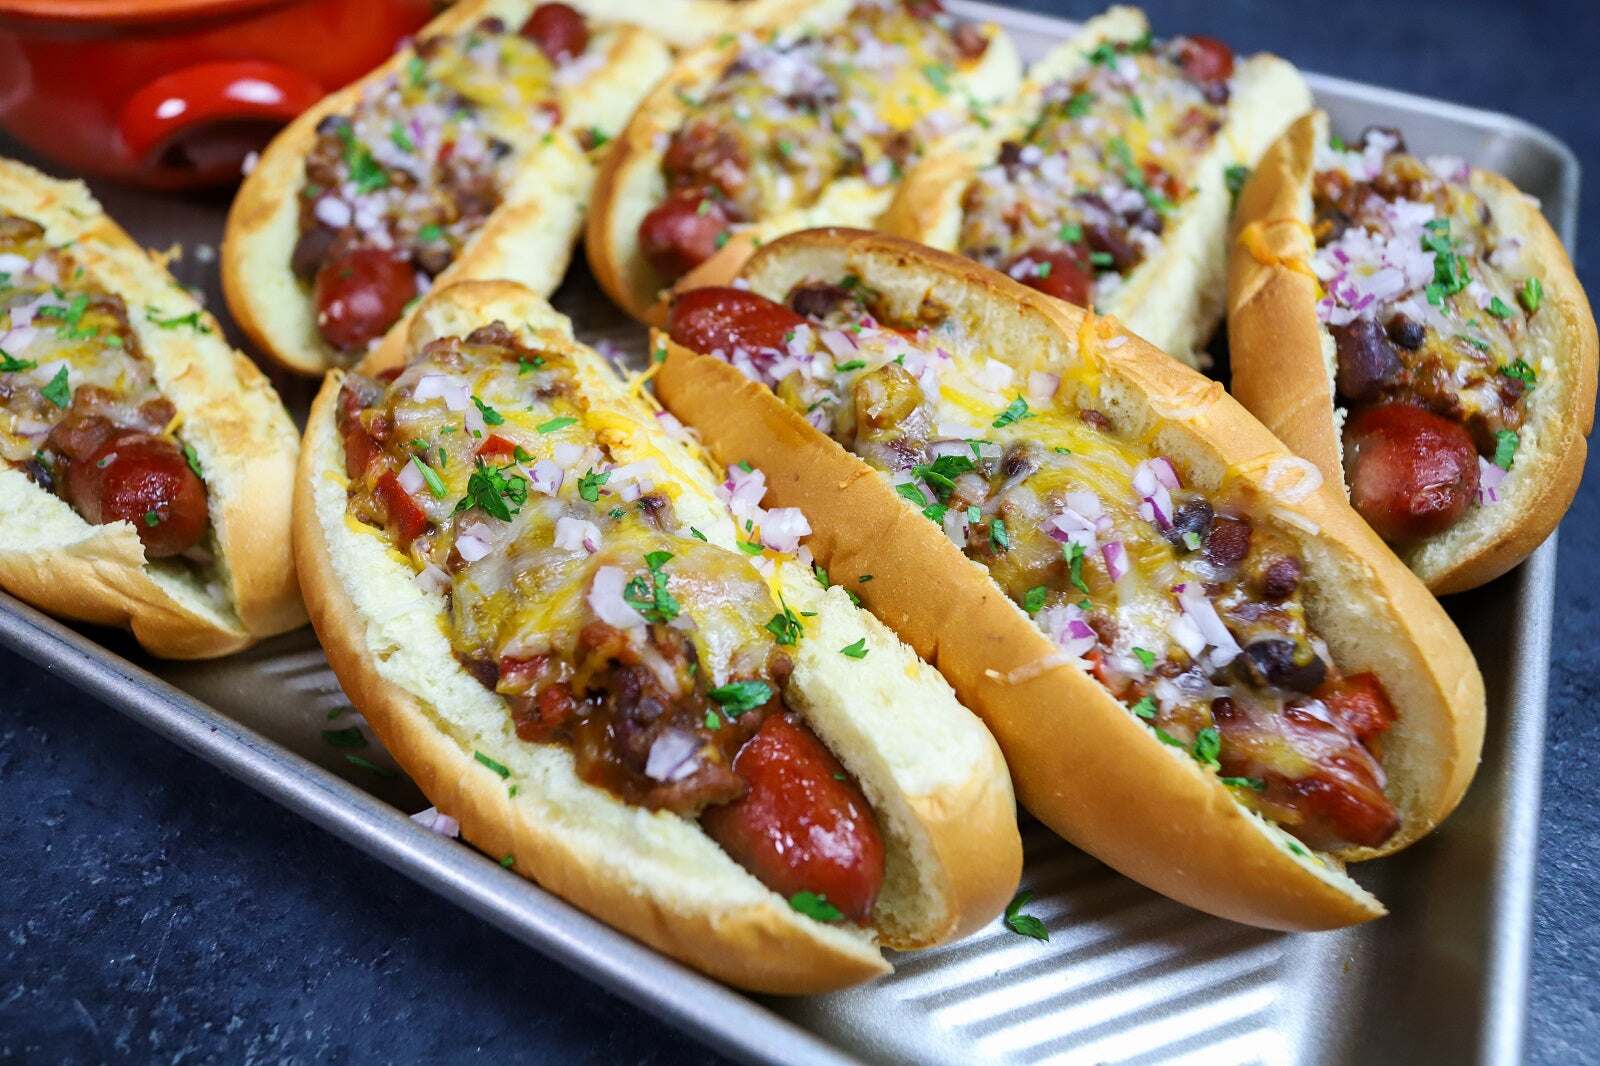 How-to: Homemade Hot Dogs Recipe - 100% Beef Hot Dogs – PS Seasoning